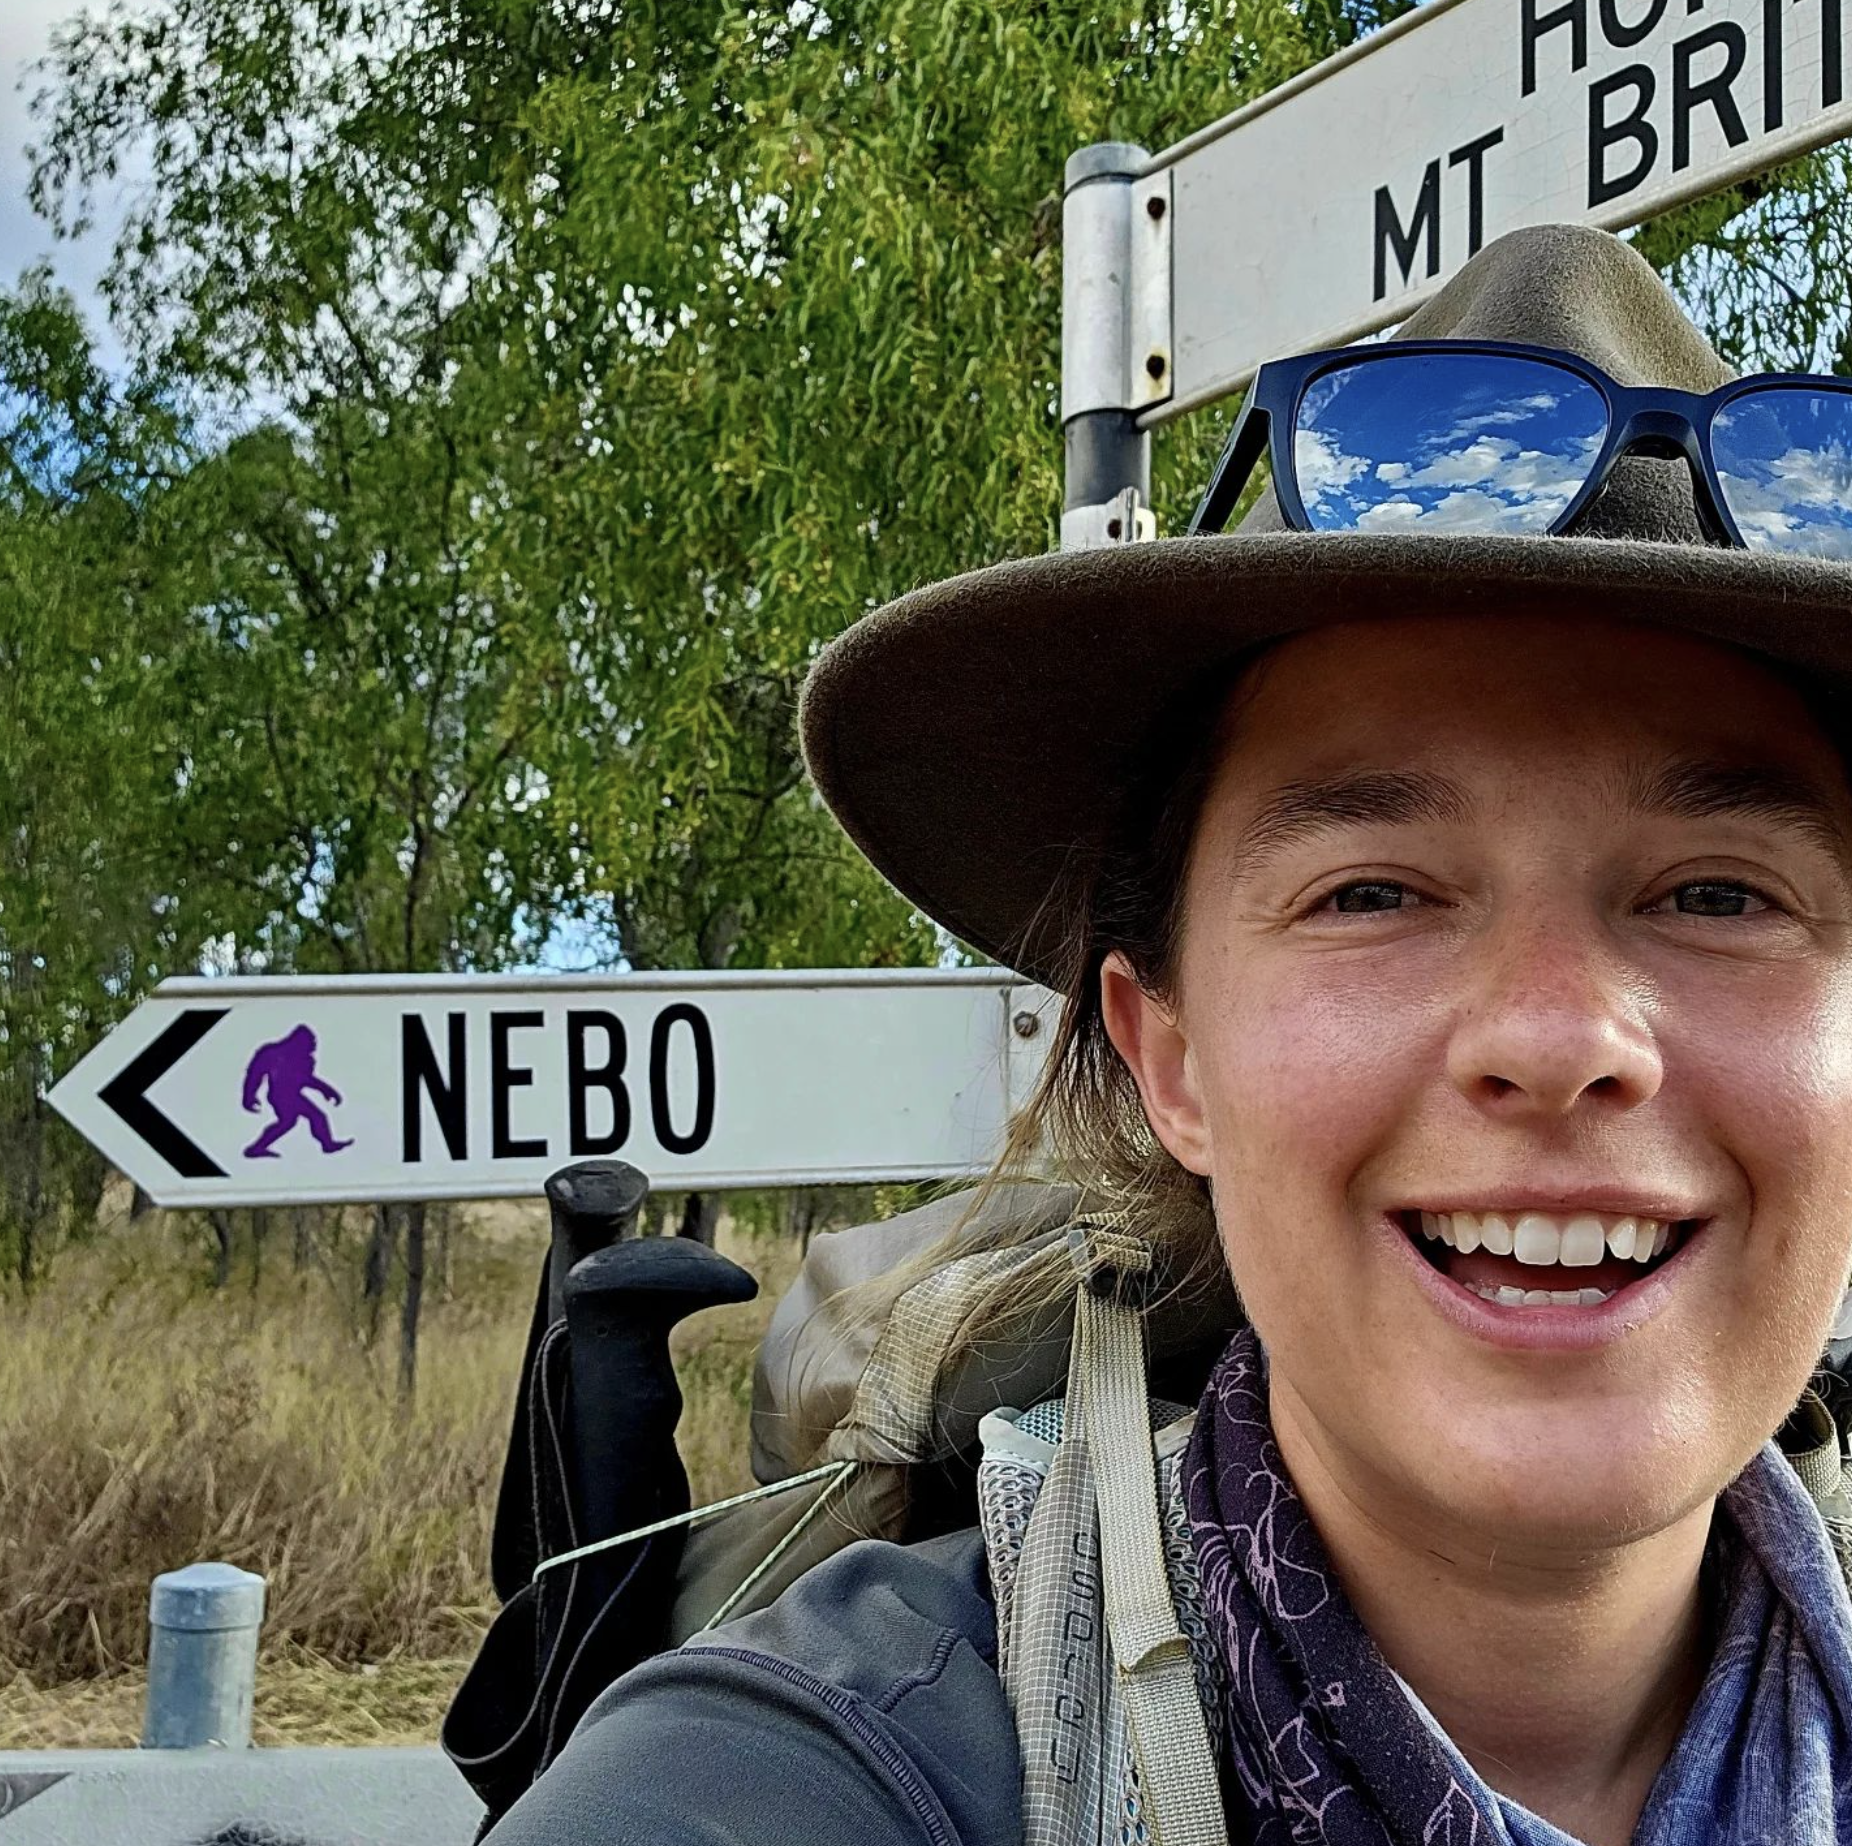 WALKING THE EXTRA MILE: HANNAH JAMES’ 5000KM JOURNEY FOR MENTAL HEALTH